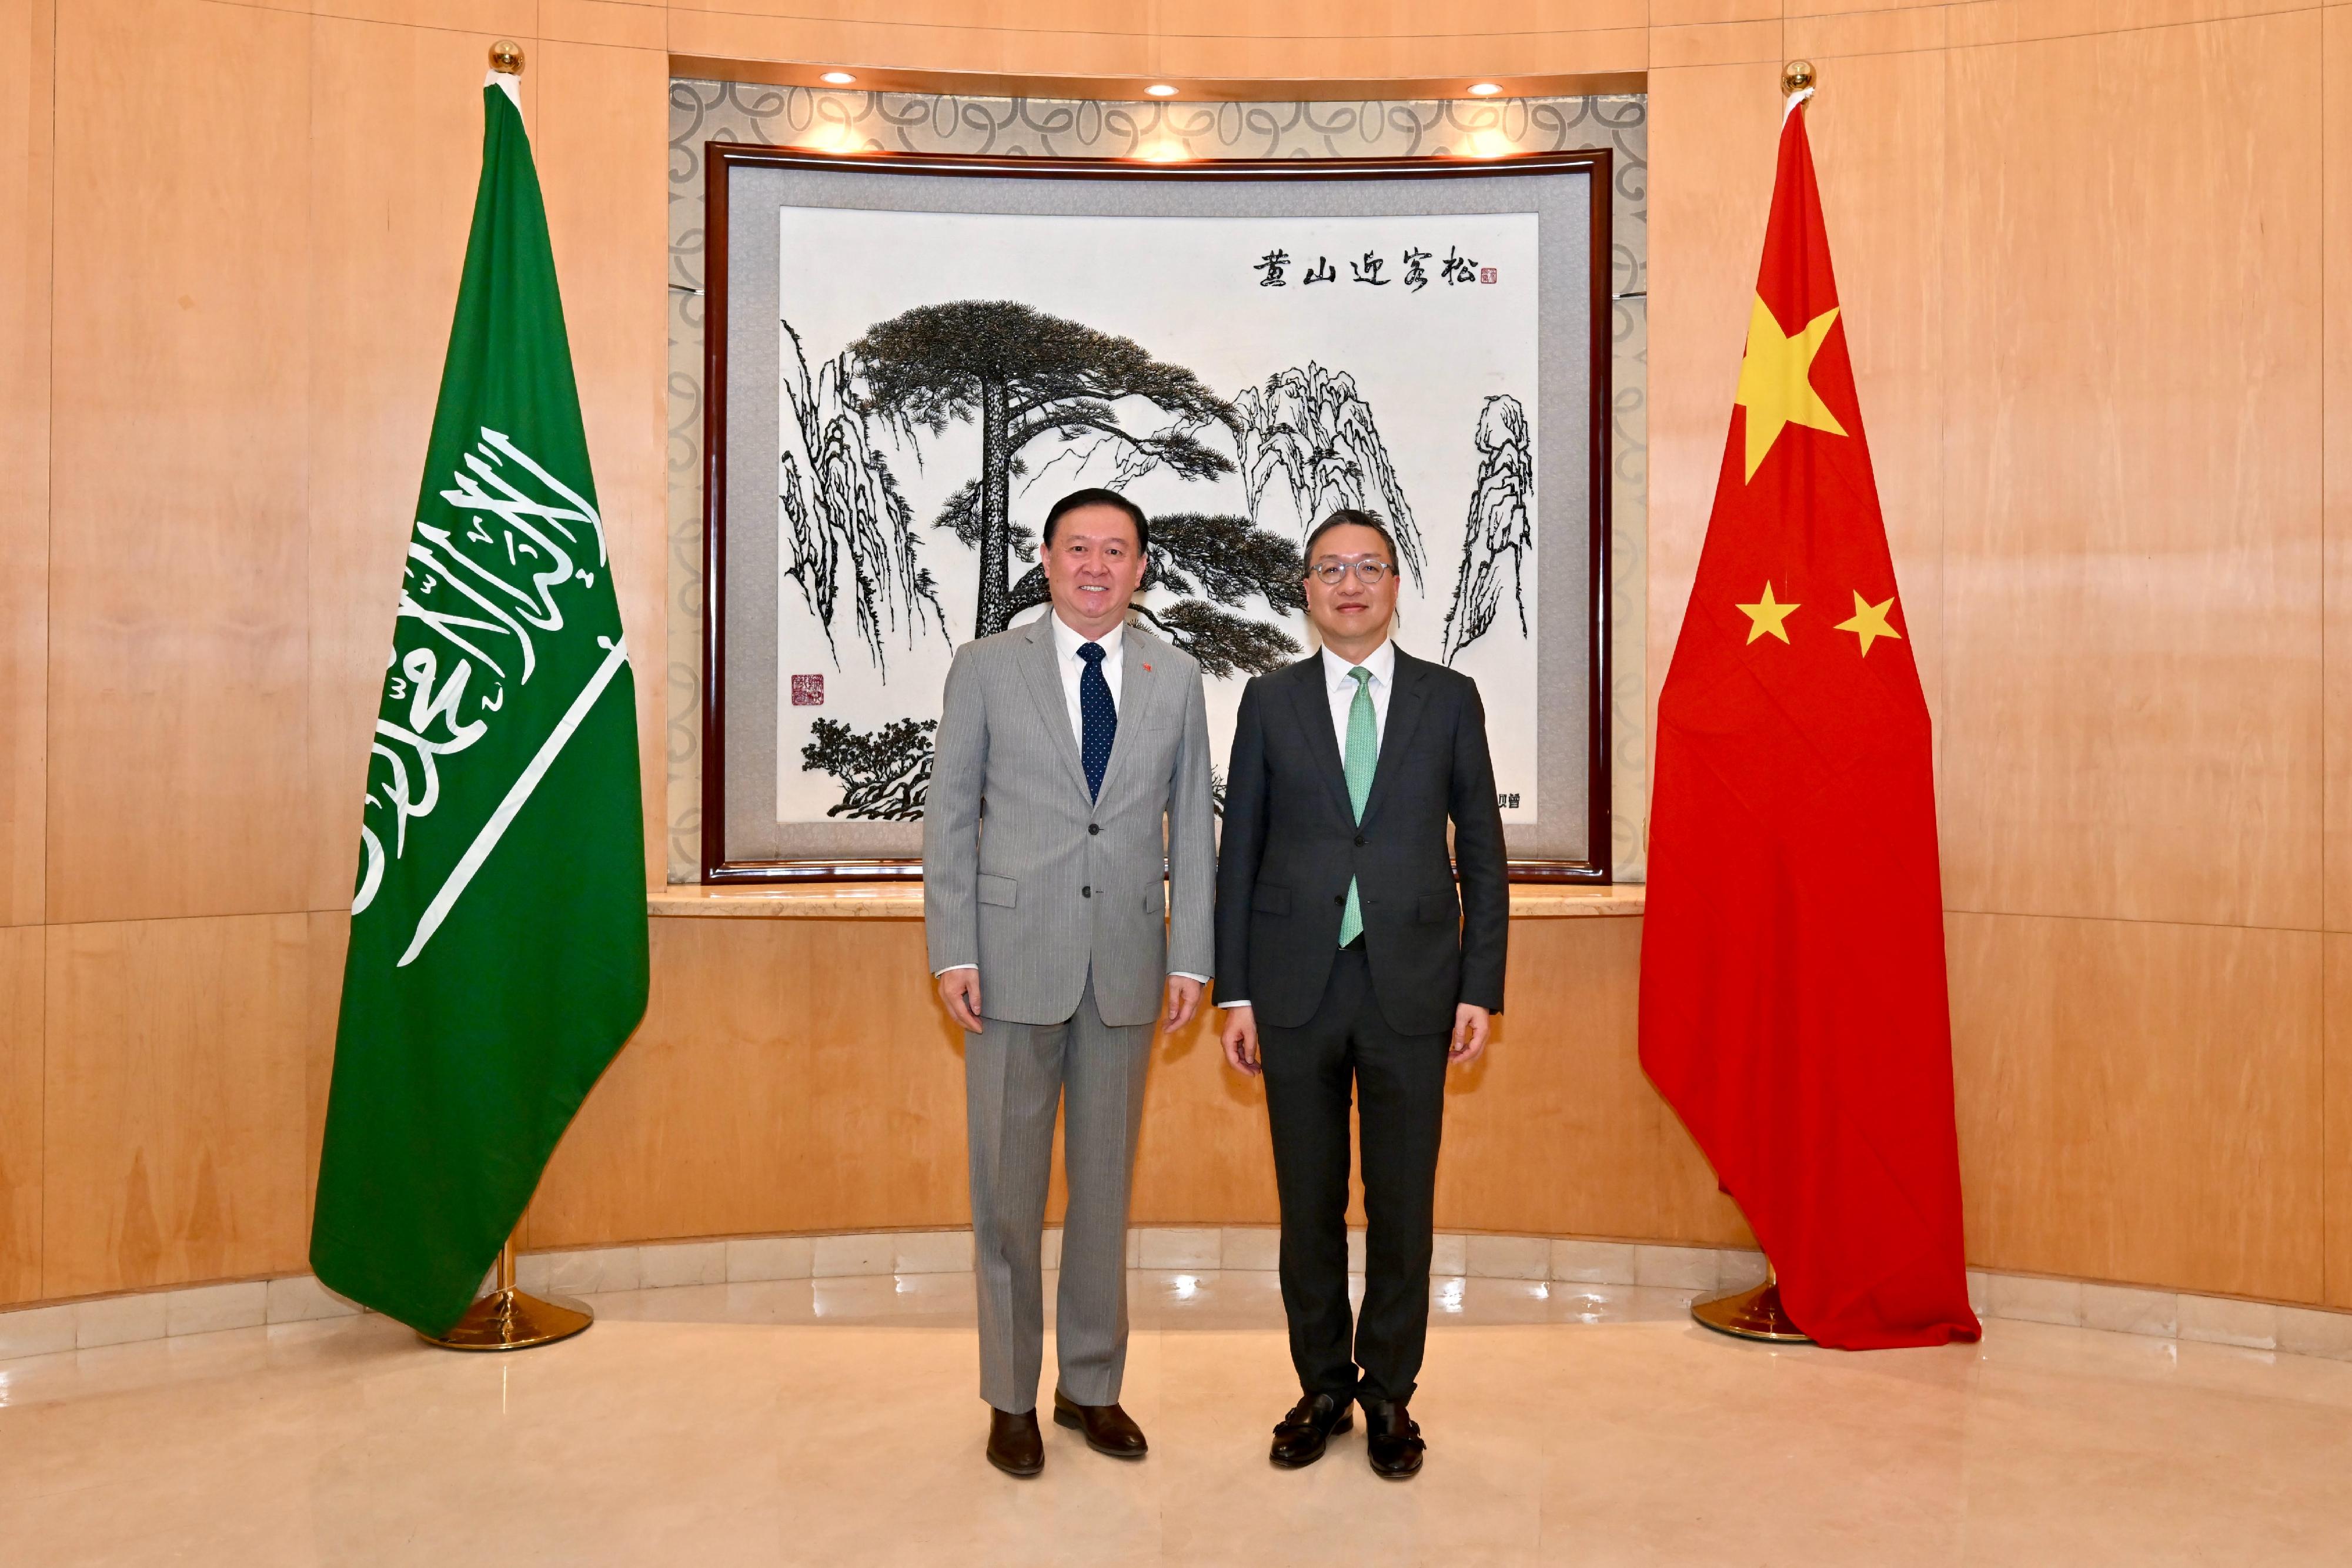 The Secretary for Justice, Mr Paul Lam, SC, arrived in Riyadh, Saudi Arabia, on May 19, Riyadh time with his about 30-person delegation, comprising representatives from the Law Society of Hong Kong, the Hong Kong Bar Association, the Hong Kong Exchanges and Clearing Limited, Invest Hong Kong and related sectors, and began a two-day visit to the city. Photo shows Mr Lam (right) with the Ambassador Extraordinary and Plenipotentiary of the People's Republic of China to the Kingdom of Saudi Arabia, Mr Chang Hua (left) before dinner.